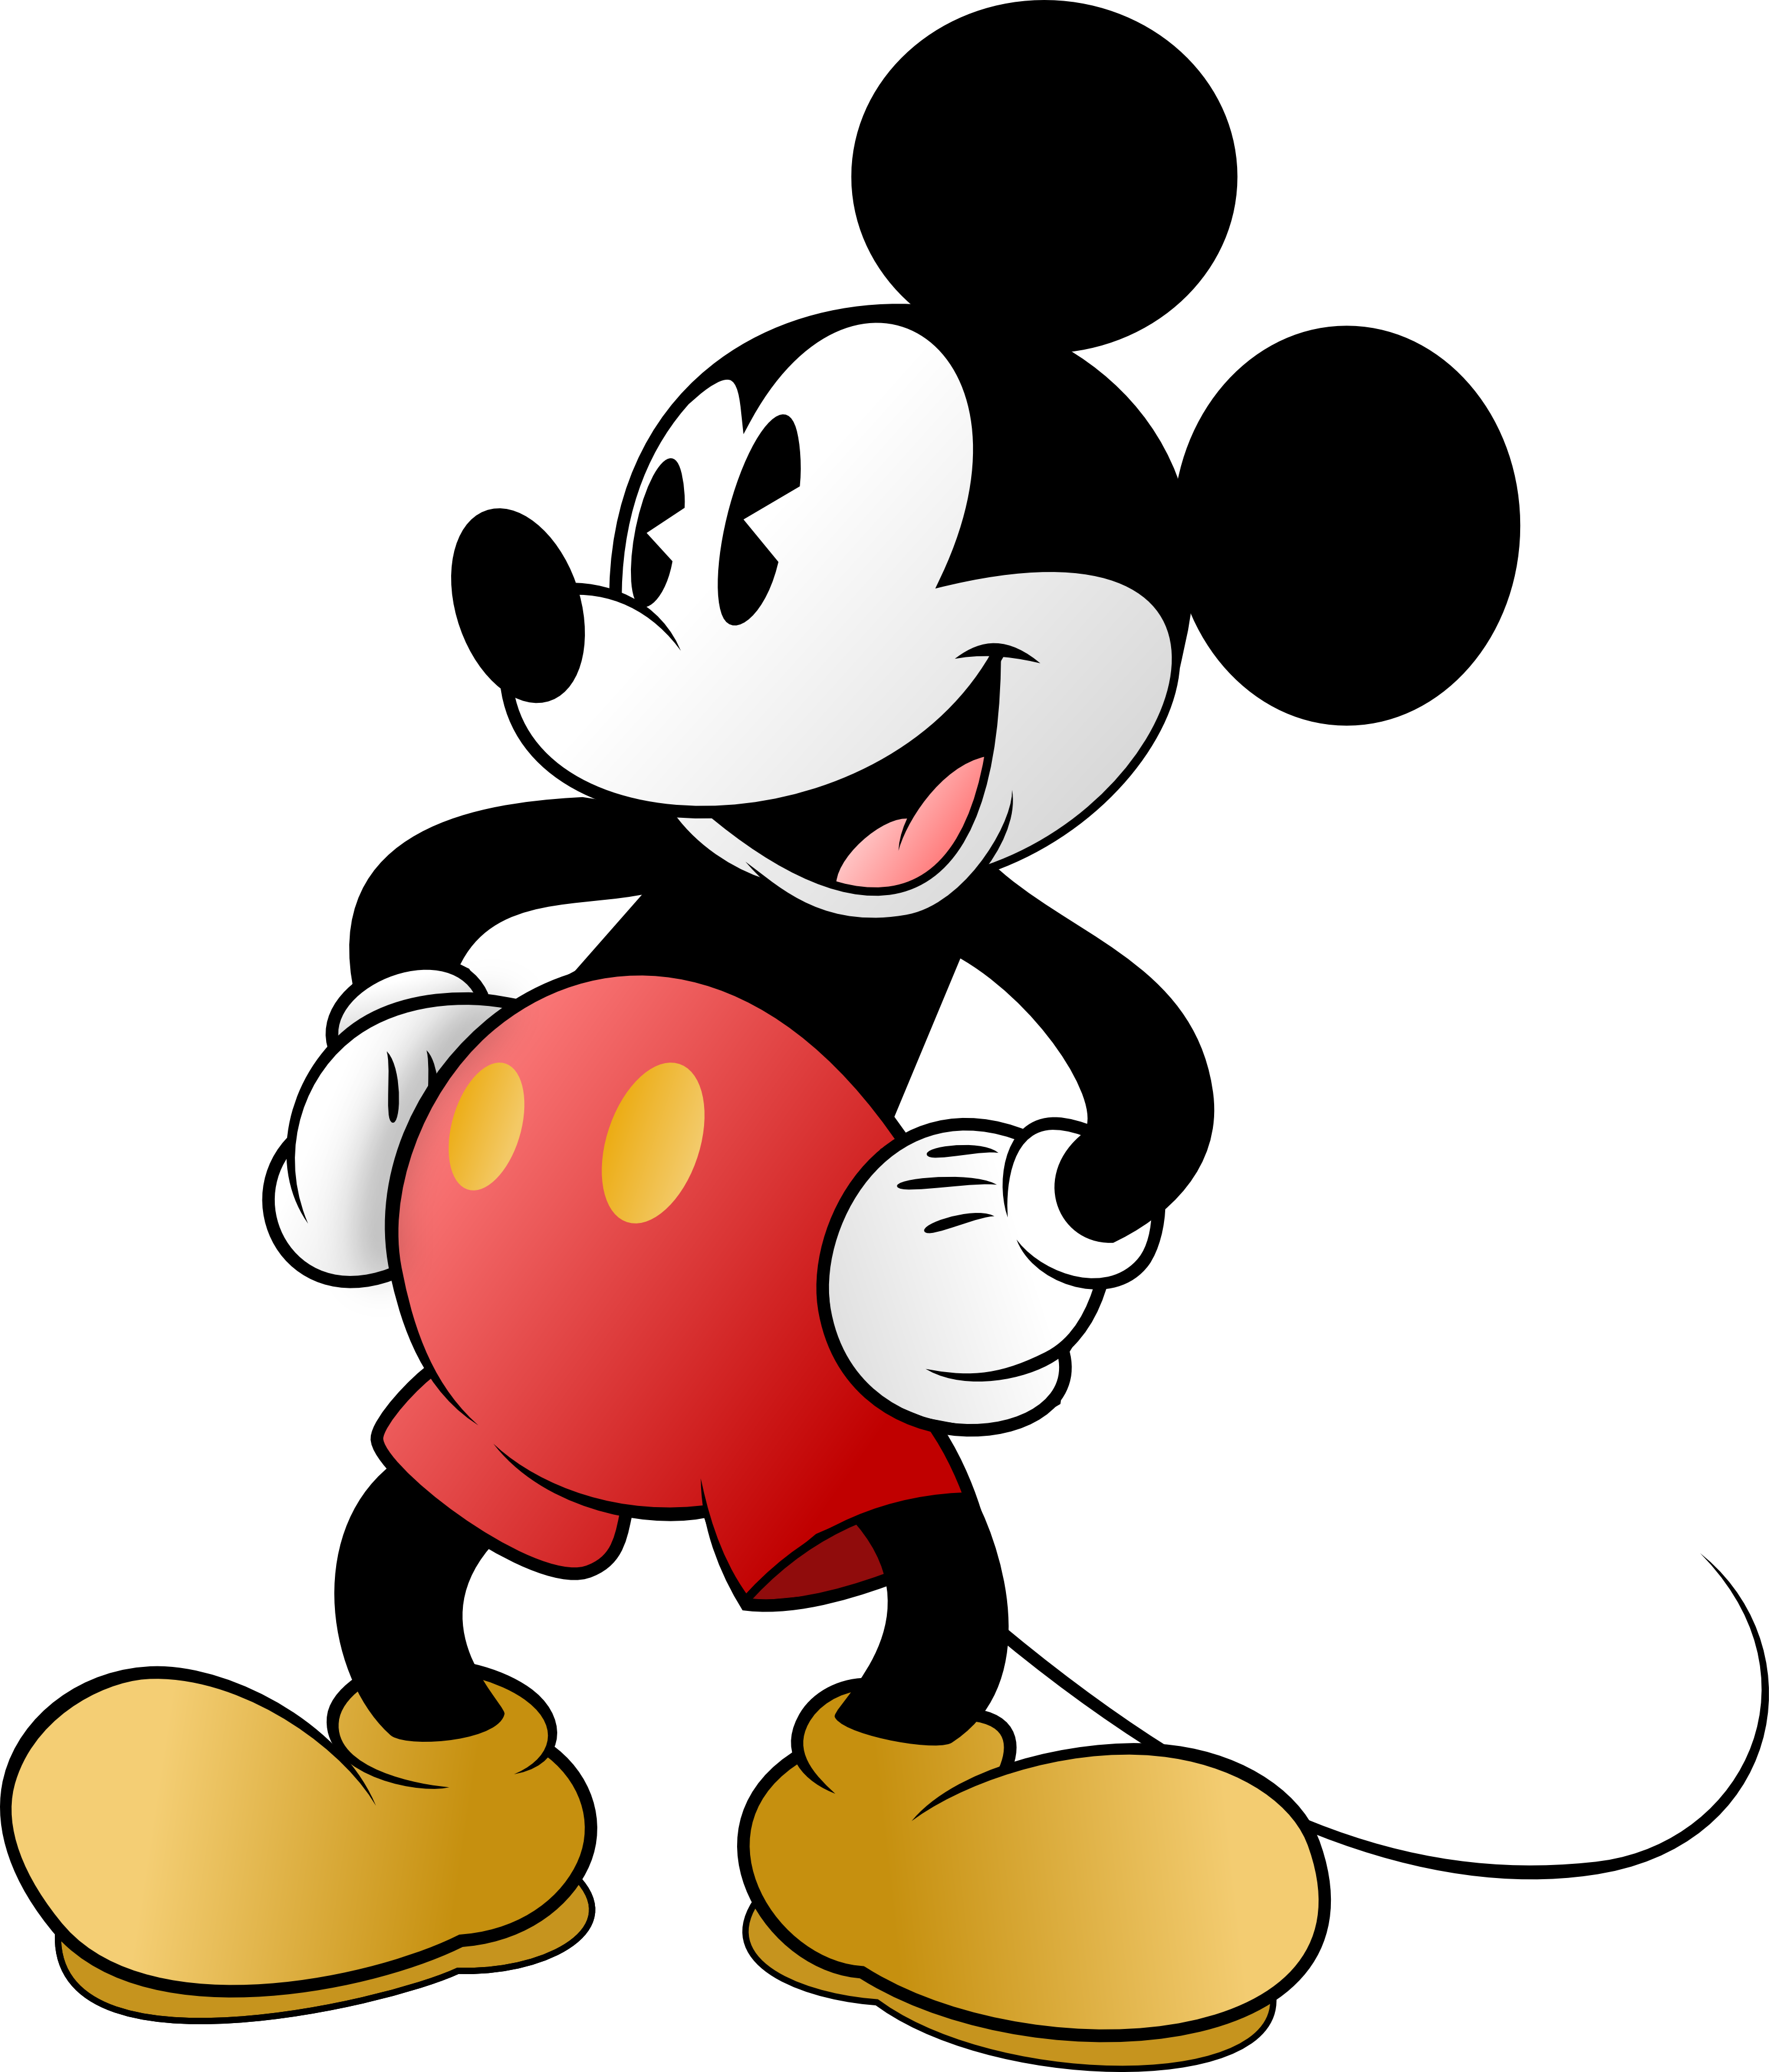 Original Classic Mickey Mouse Wallpapers